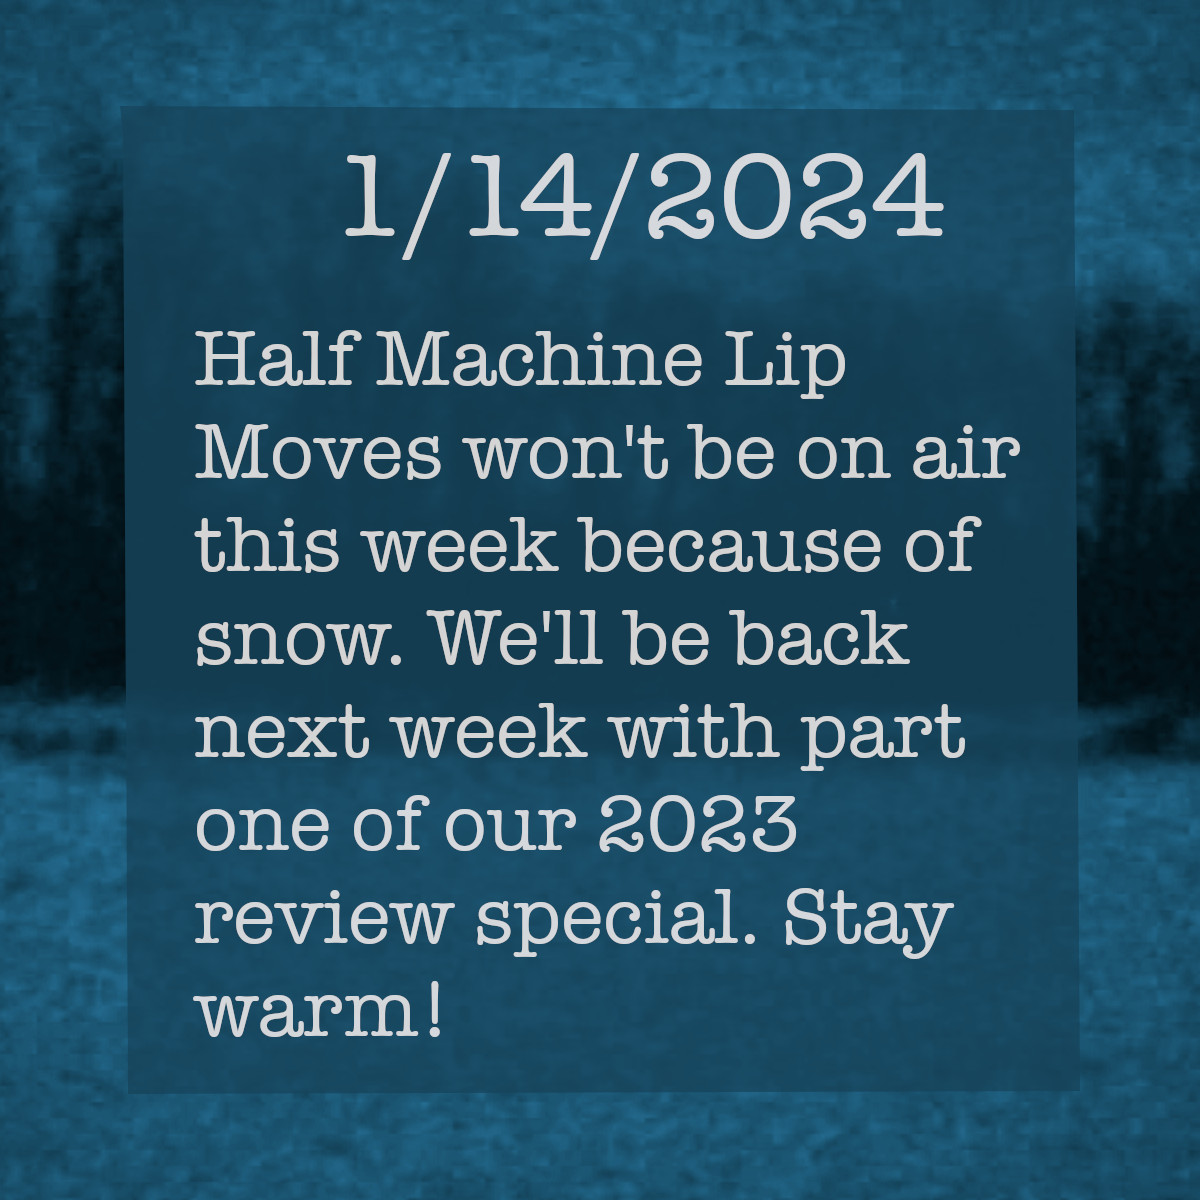 The text shows a grainy, low-resolution photo taken of a wintry forest scene. The text on the picture reads, &ldquo;January 14, 2024. Half Machine Lip Moves won&rsquo;t be on air this week because of snow. We&rsquo;ll be back next week with part one of our 2023 review special. Till then, stay warm!&rdquo;